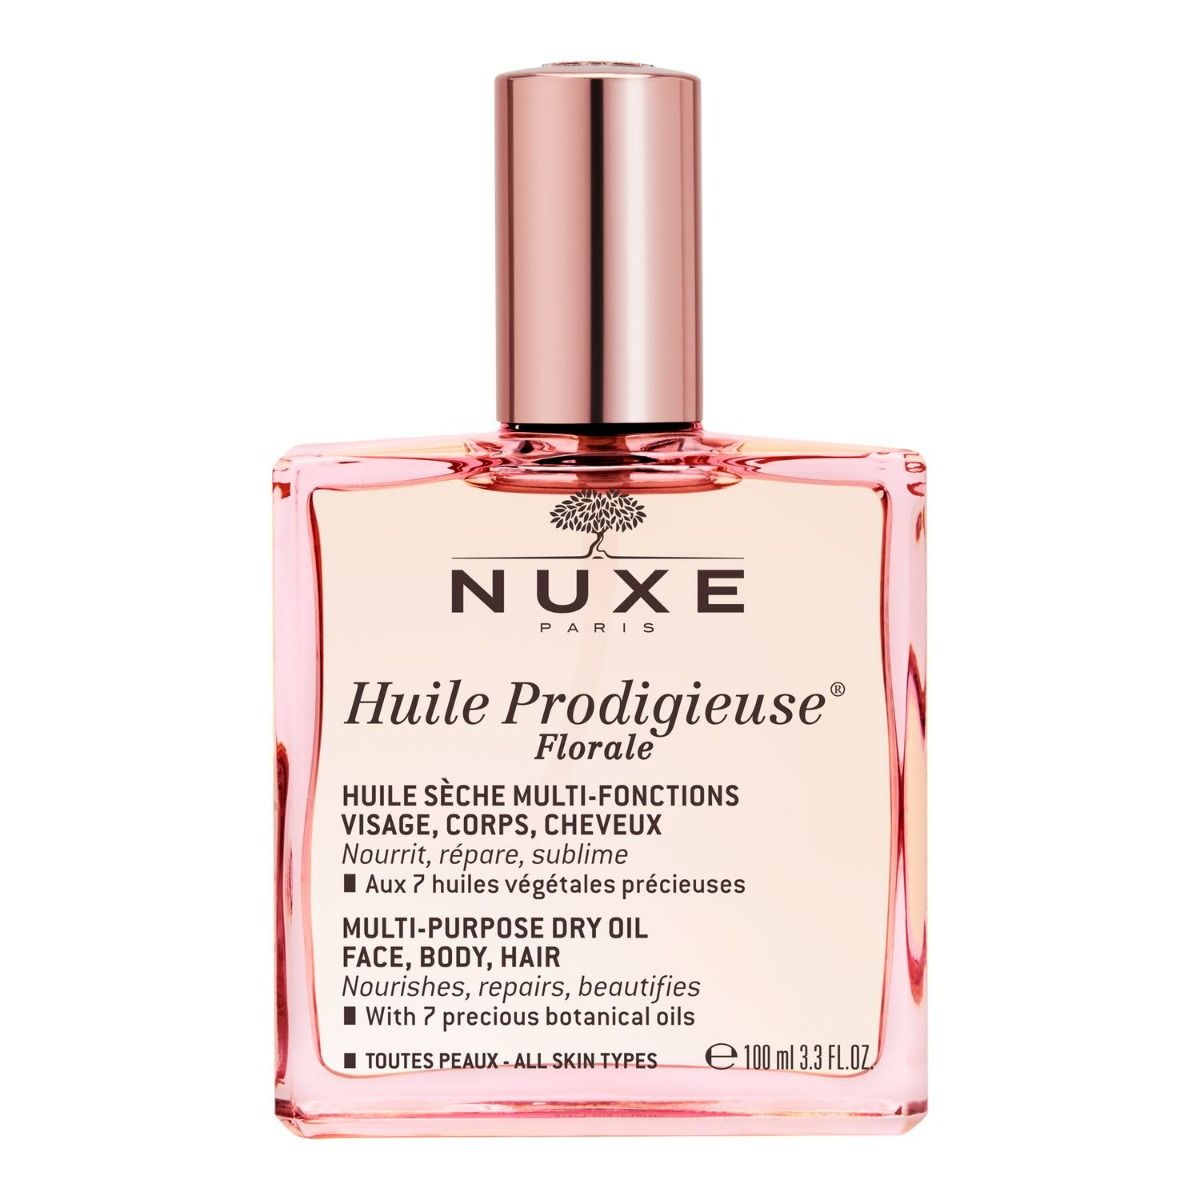 Nuxe Huile Prodigieuse Florale масло для лица, тела и волос, 100 ml nuxe масло huile prodigieuse florale цветочное сухое 50 мл